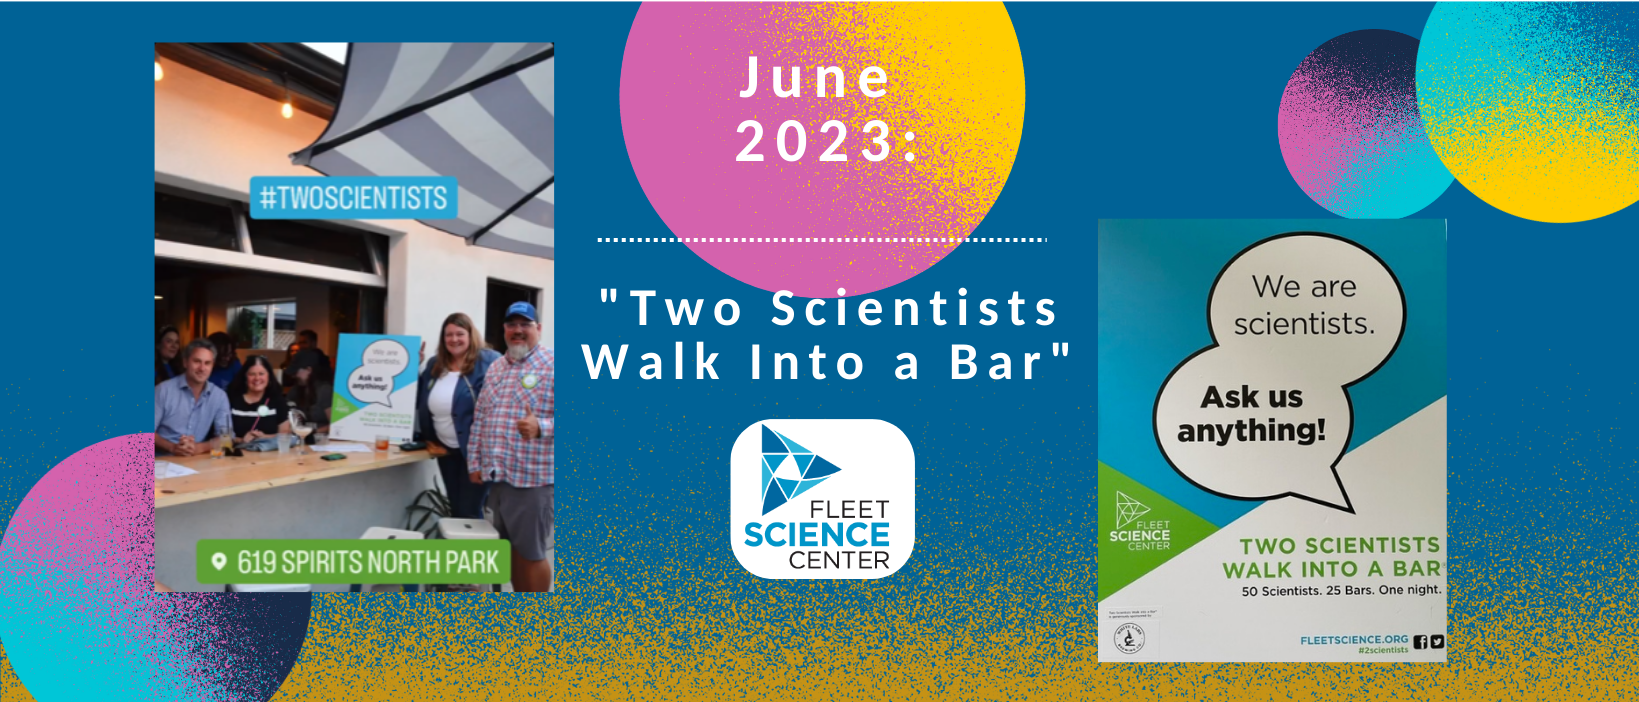 3 of 6, June 2023- Two Scientists Walk Into a Bar Event. One picture shows Taylor Berninger with other scientists around their sign at 619 Spirits in North Park, waiting to talk to patrons. Another picture is a close up of the sign depicting quote bubbles stating "We are Scientists- Ask us Anything!" with the Fleet Science Center logo and promoting the hashtag #2Scientists.